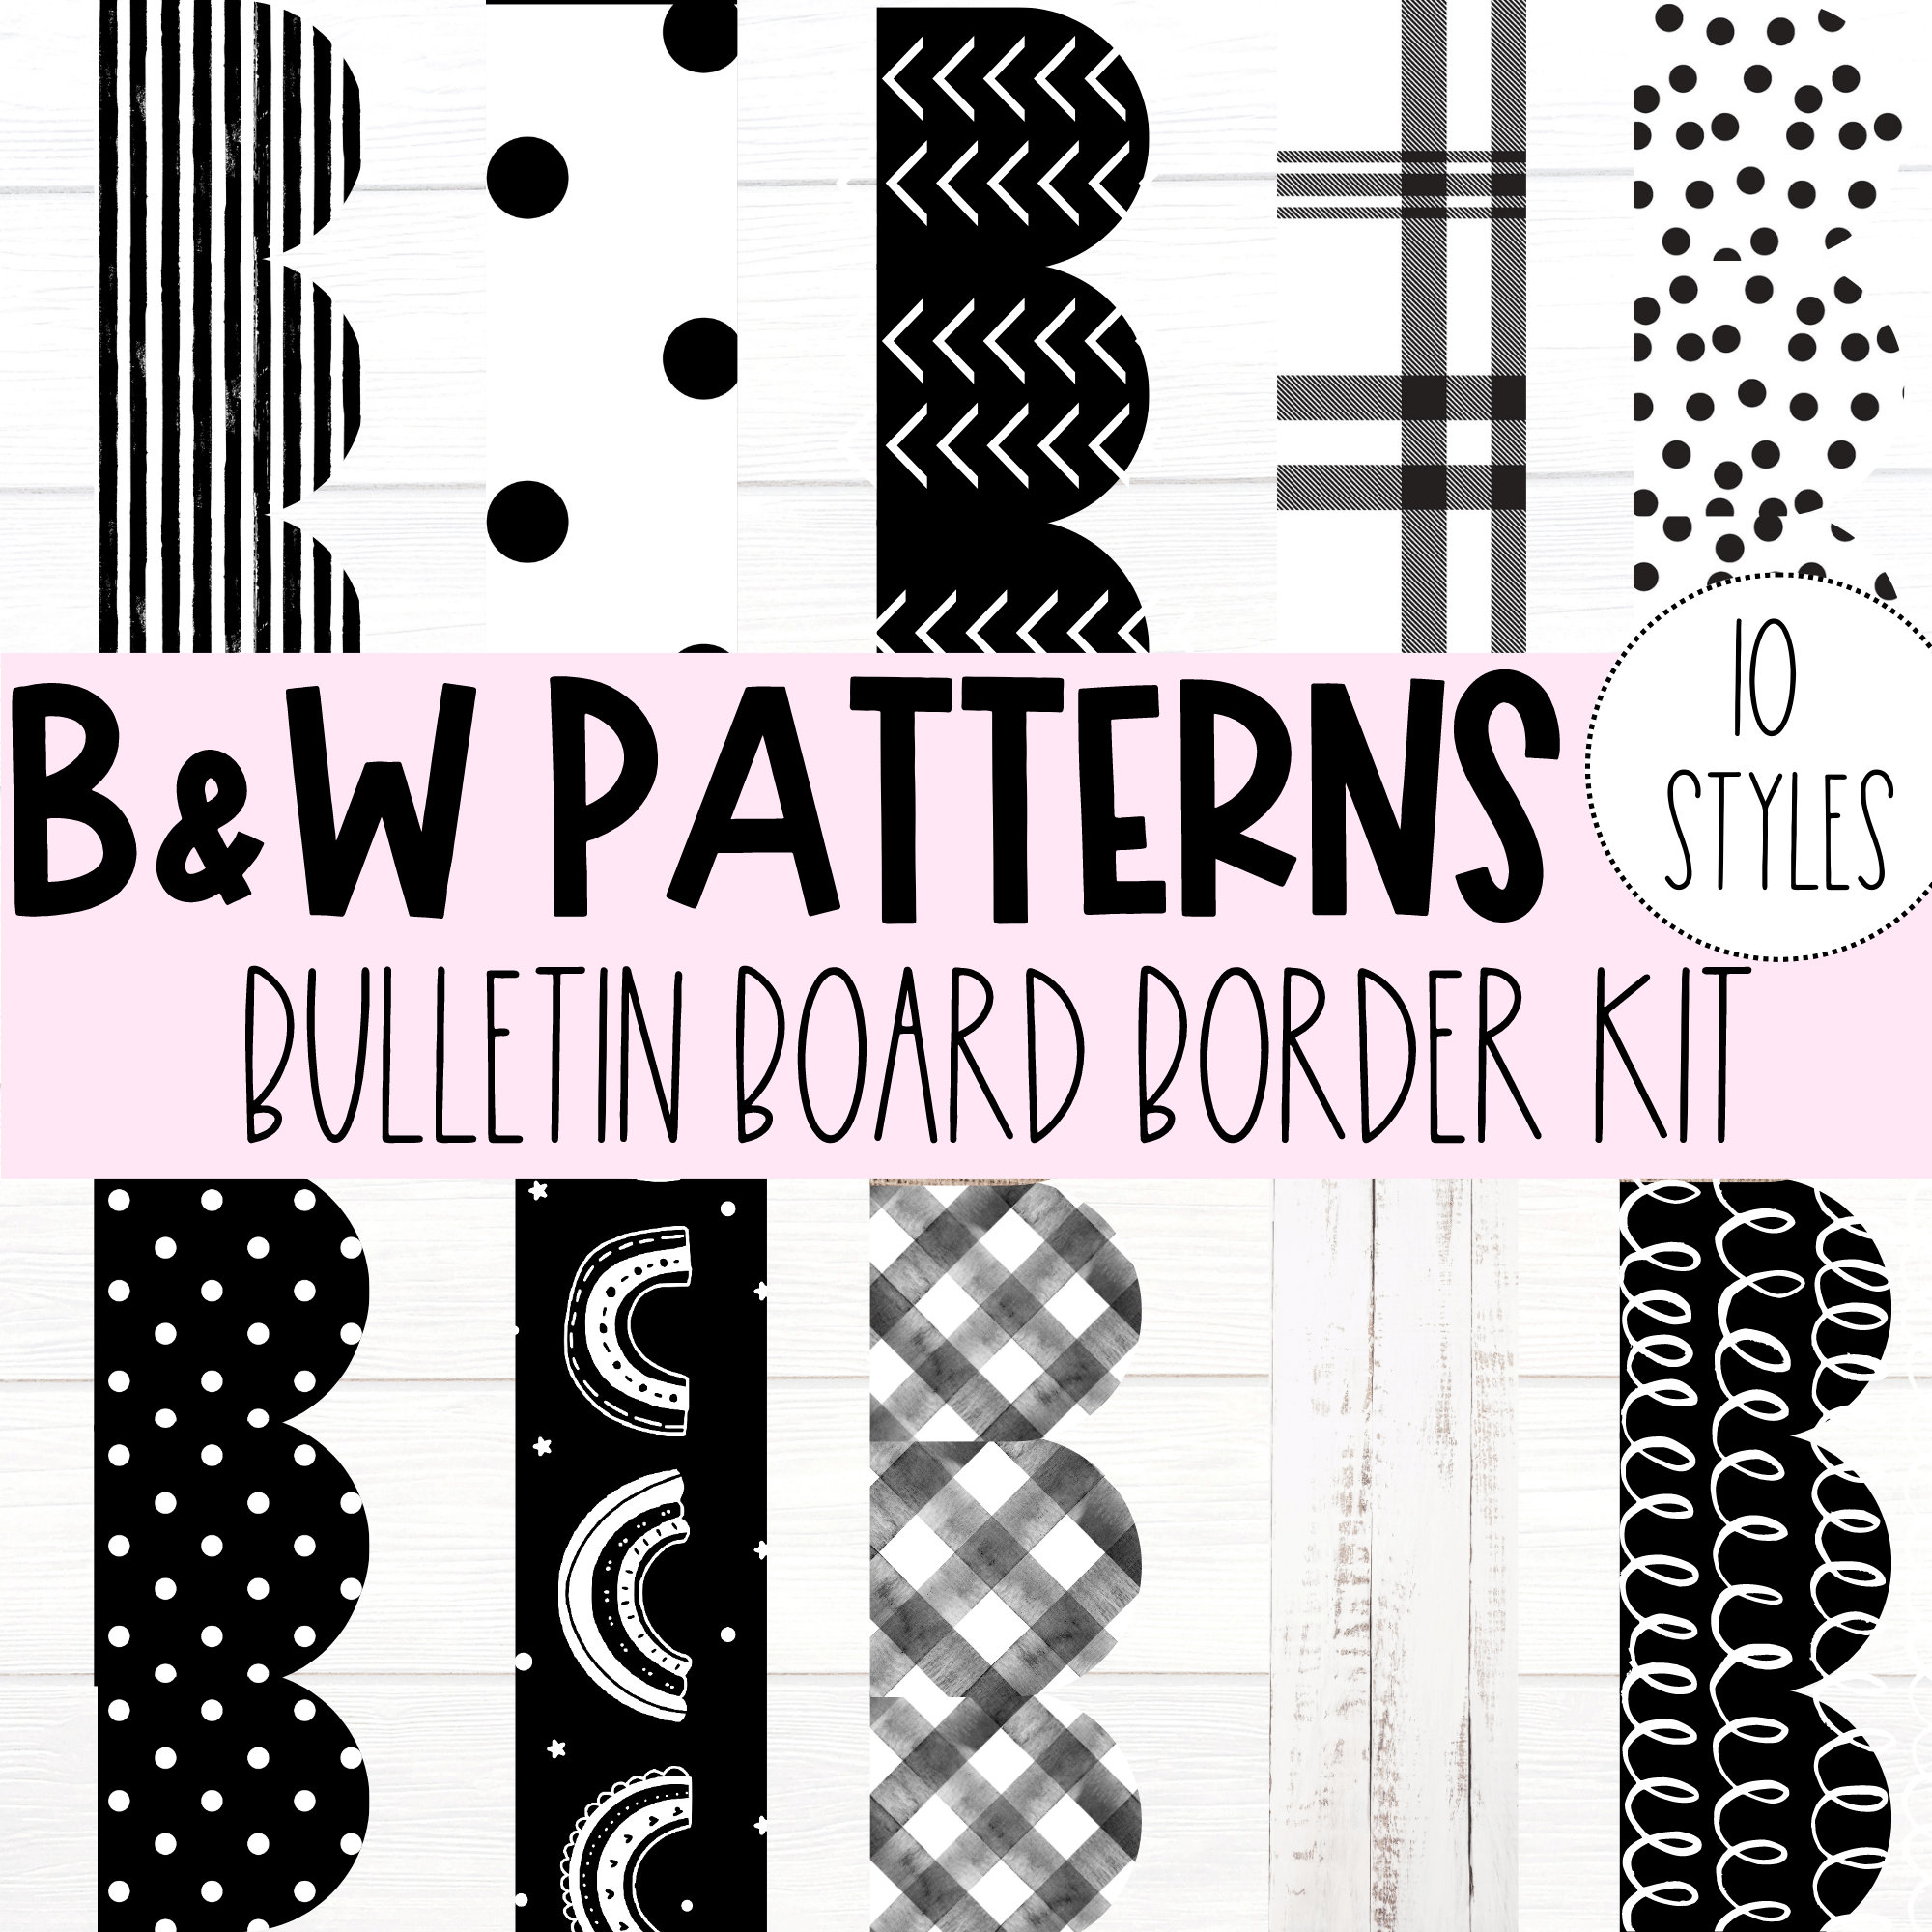 Paper Black & White Collection Pennant Bulletin Board Borders